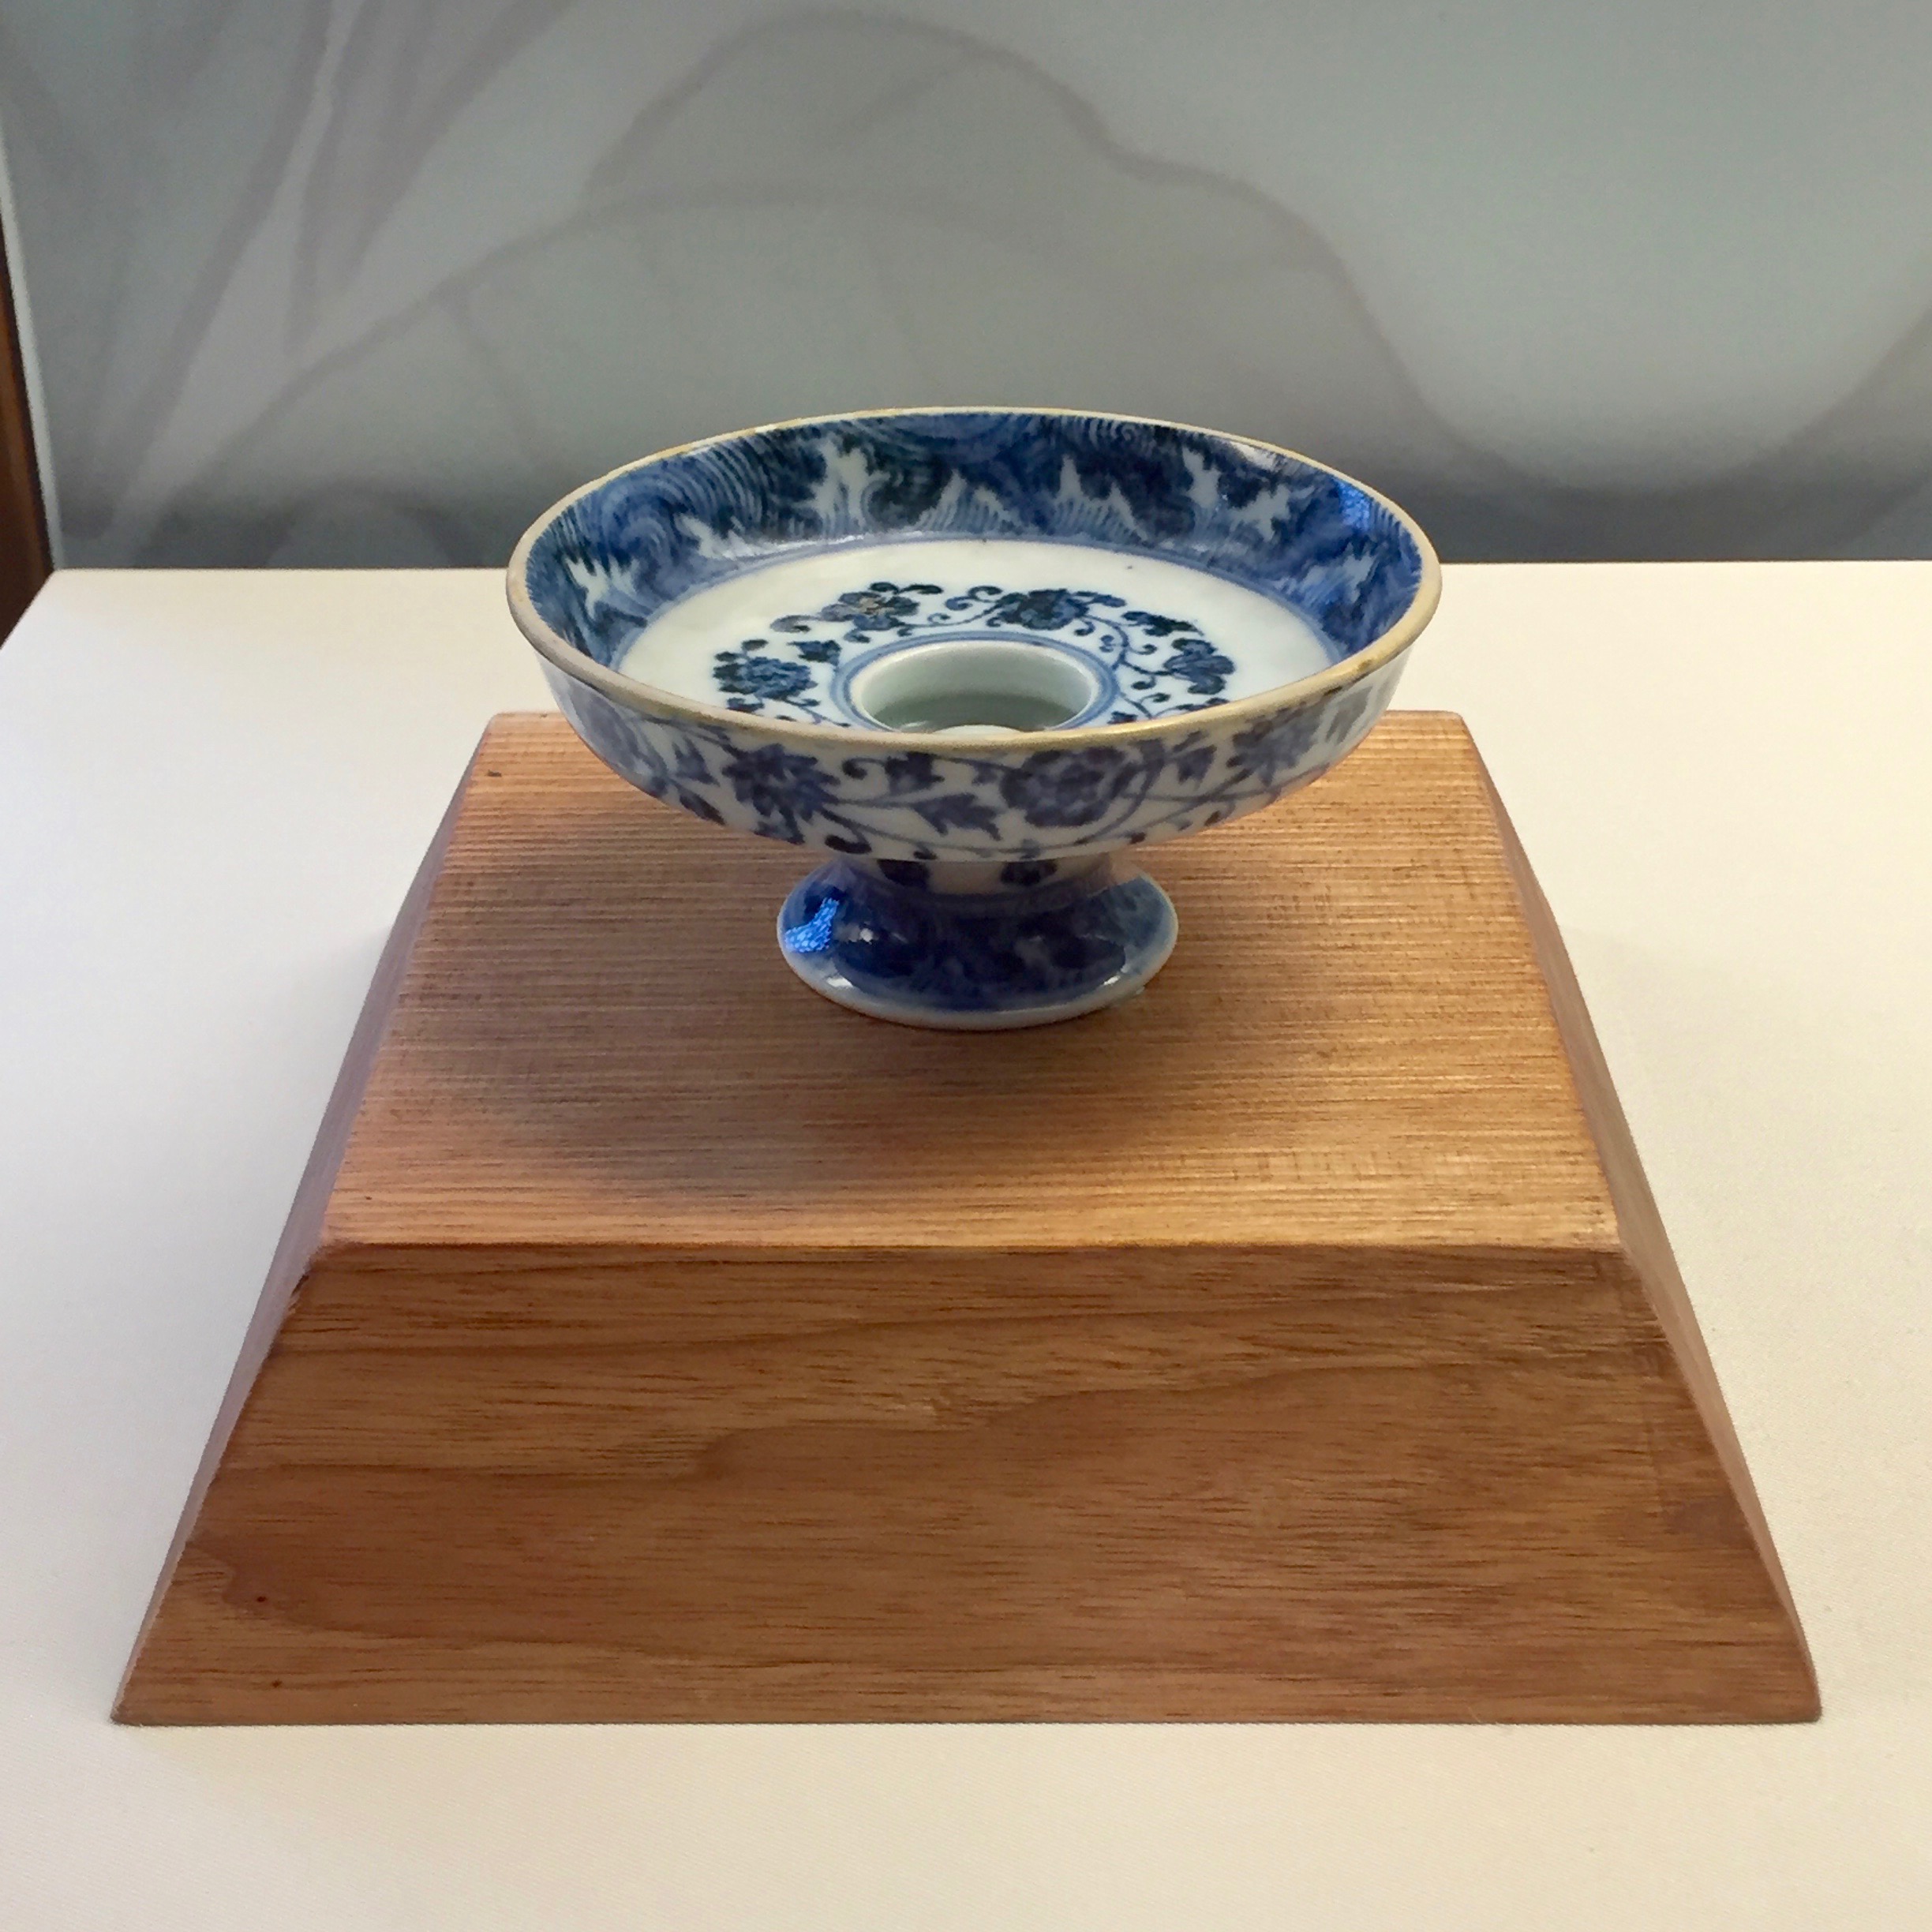  Blue and White Stem Plate  Yongle Emperor's Reign (1403-1424), Ming Dynasty 